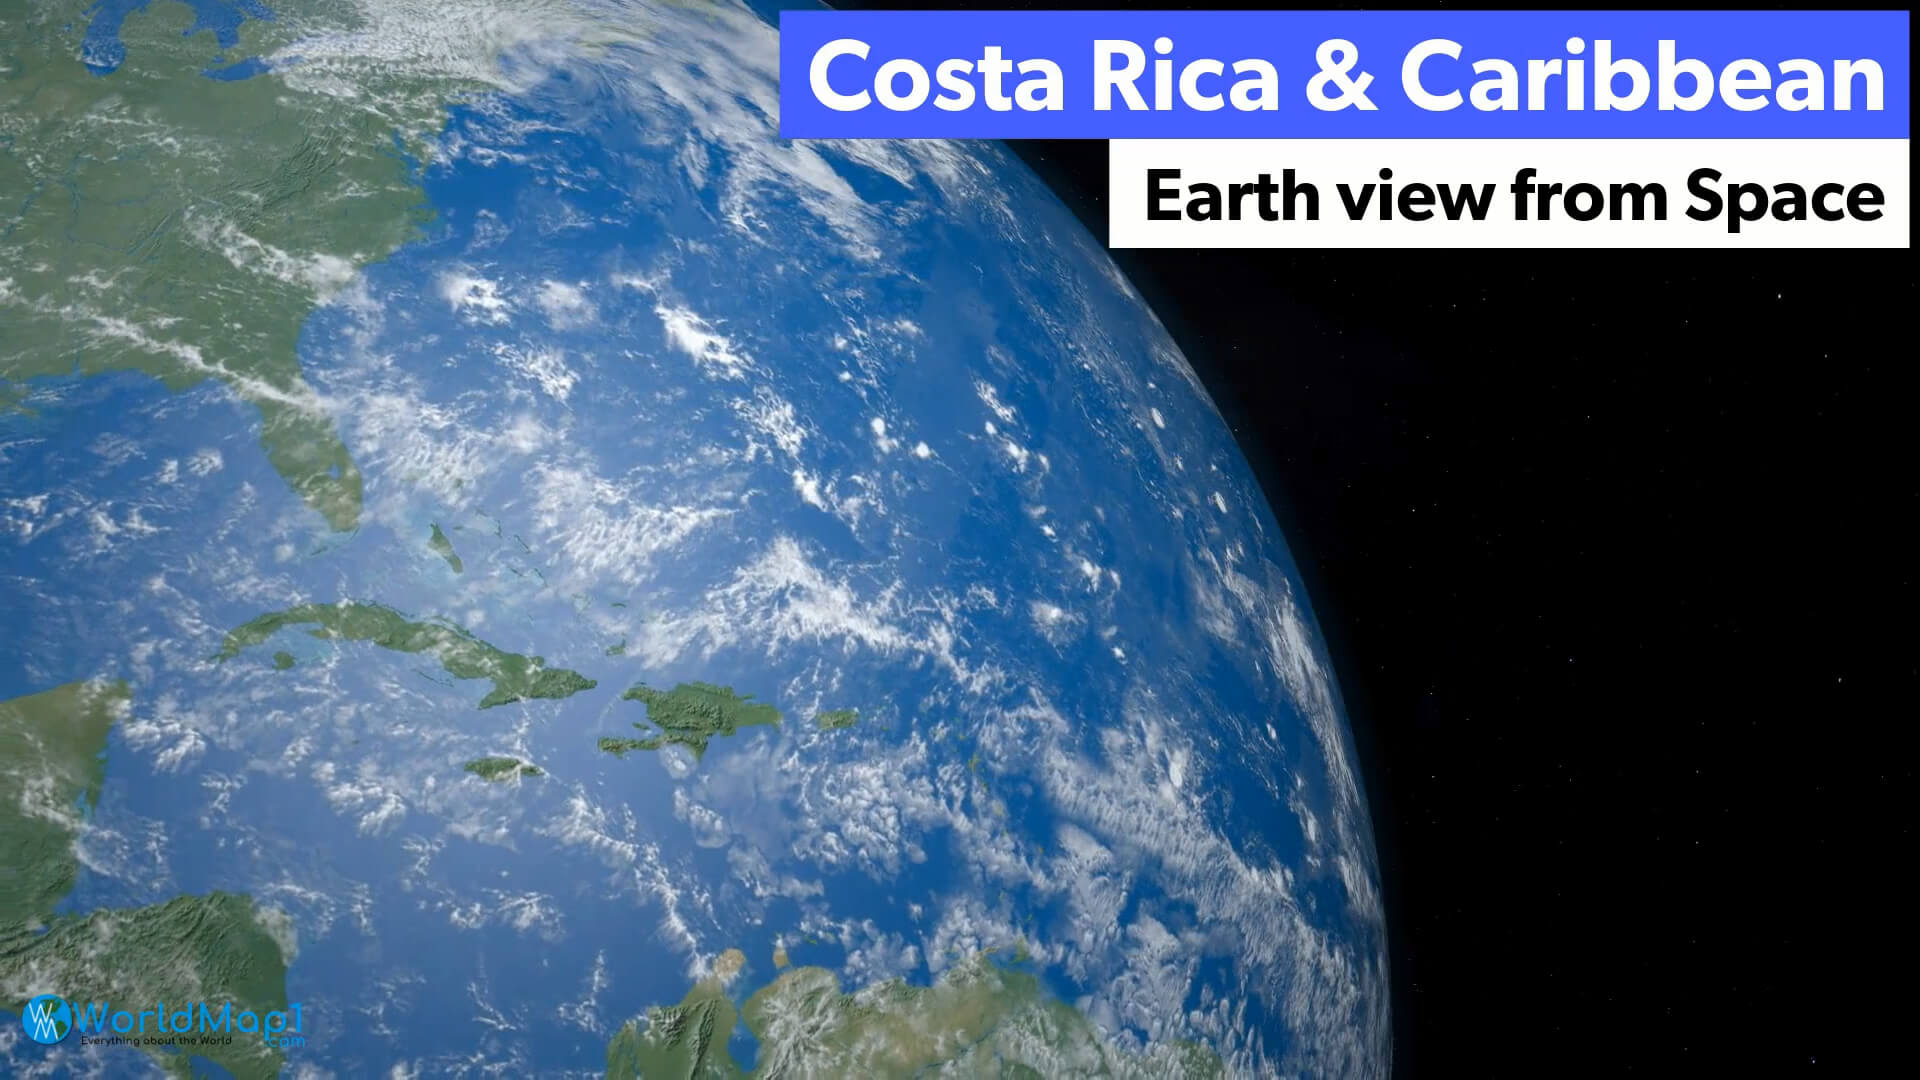 Costa Rica and Caribbean Earth View from Space